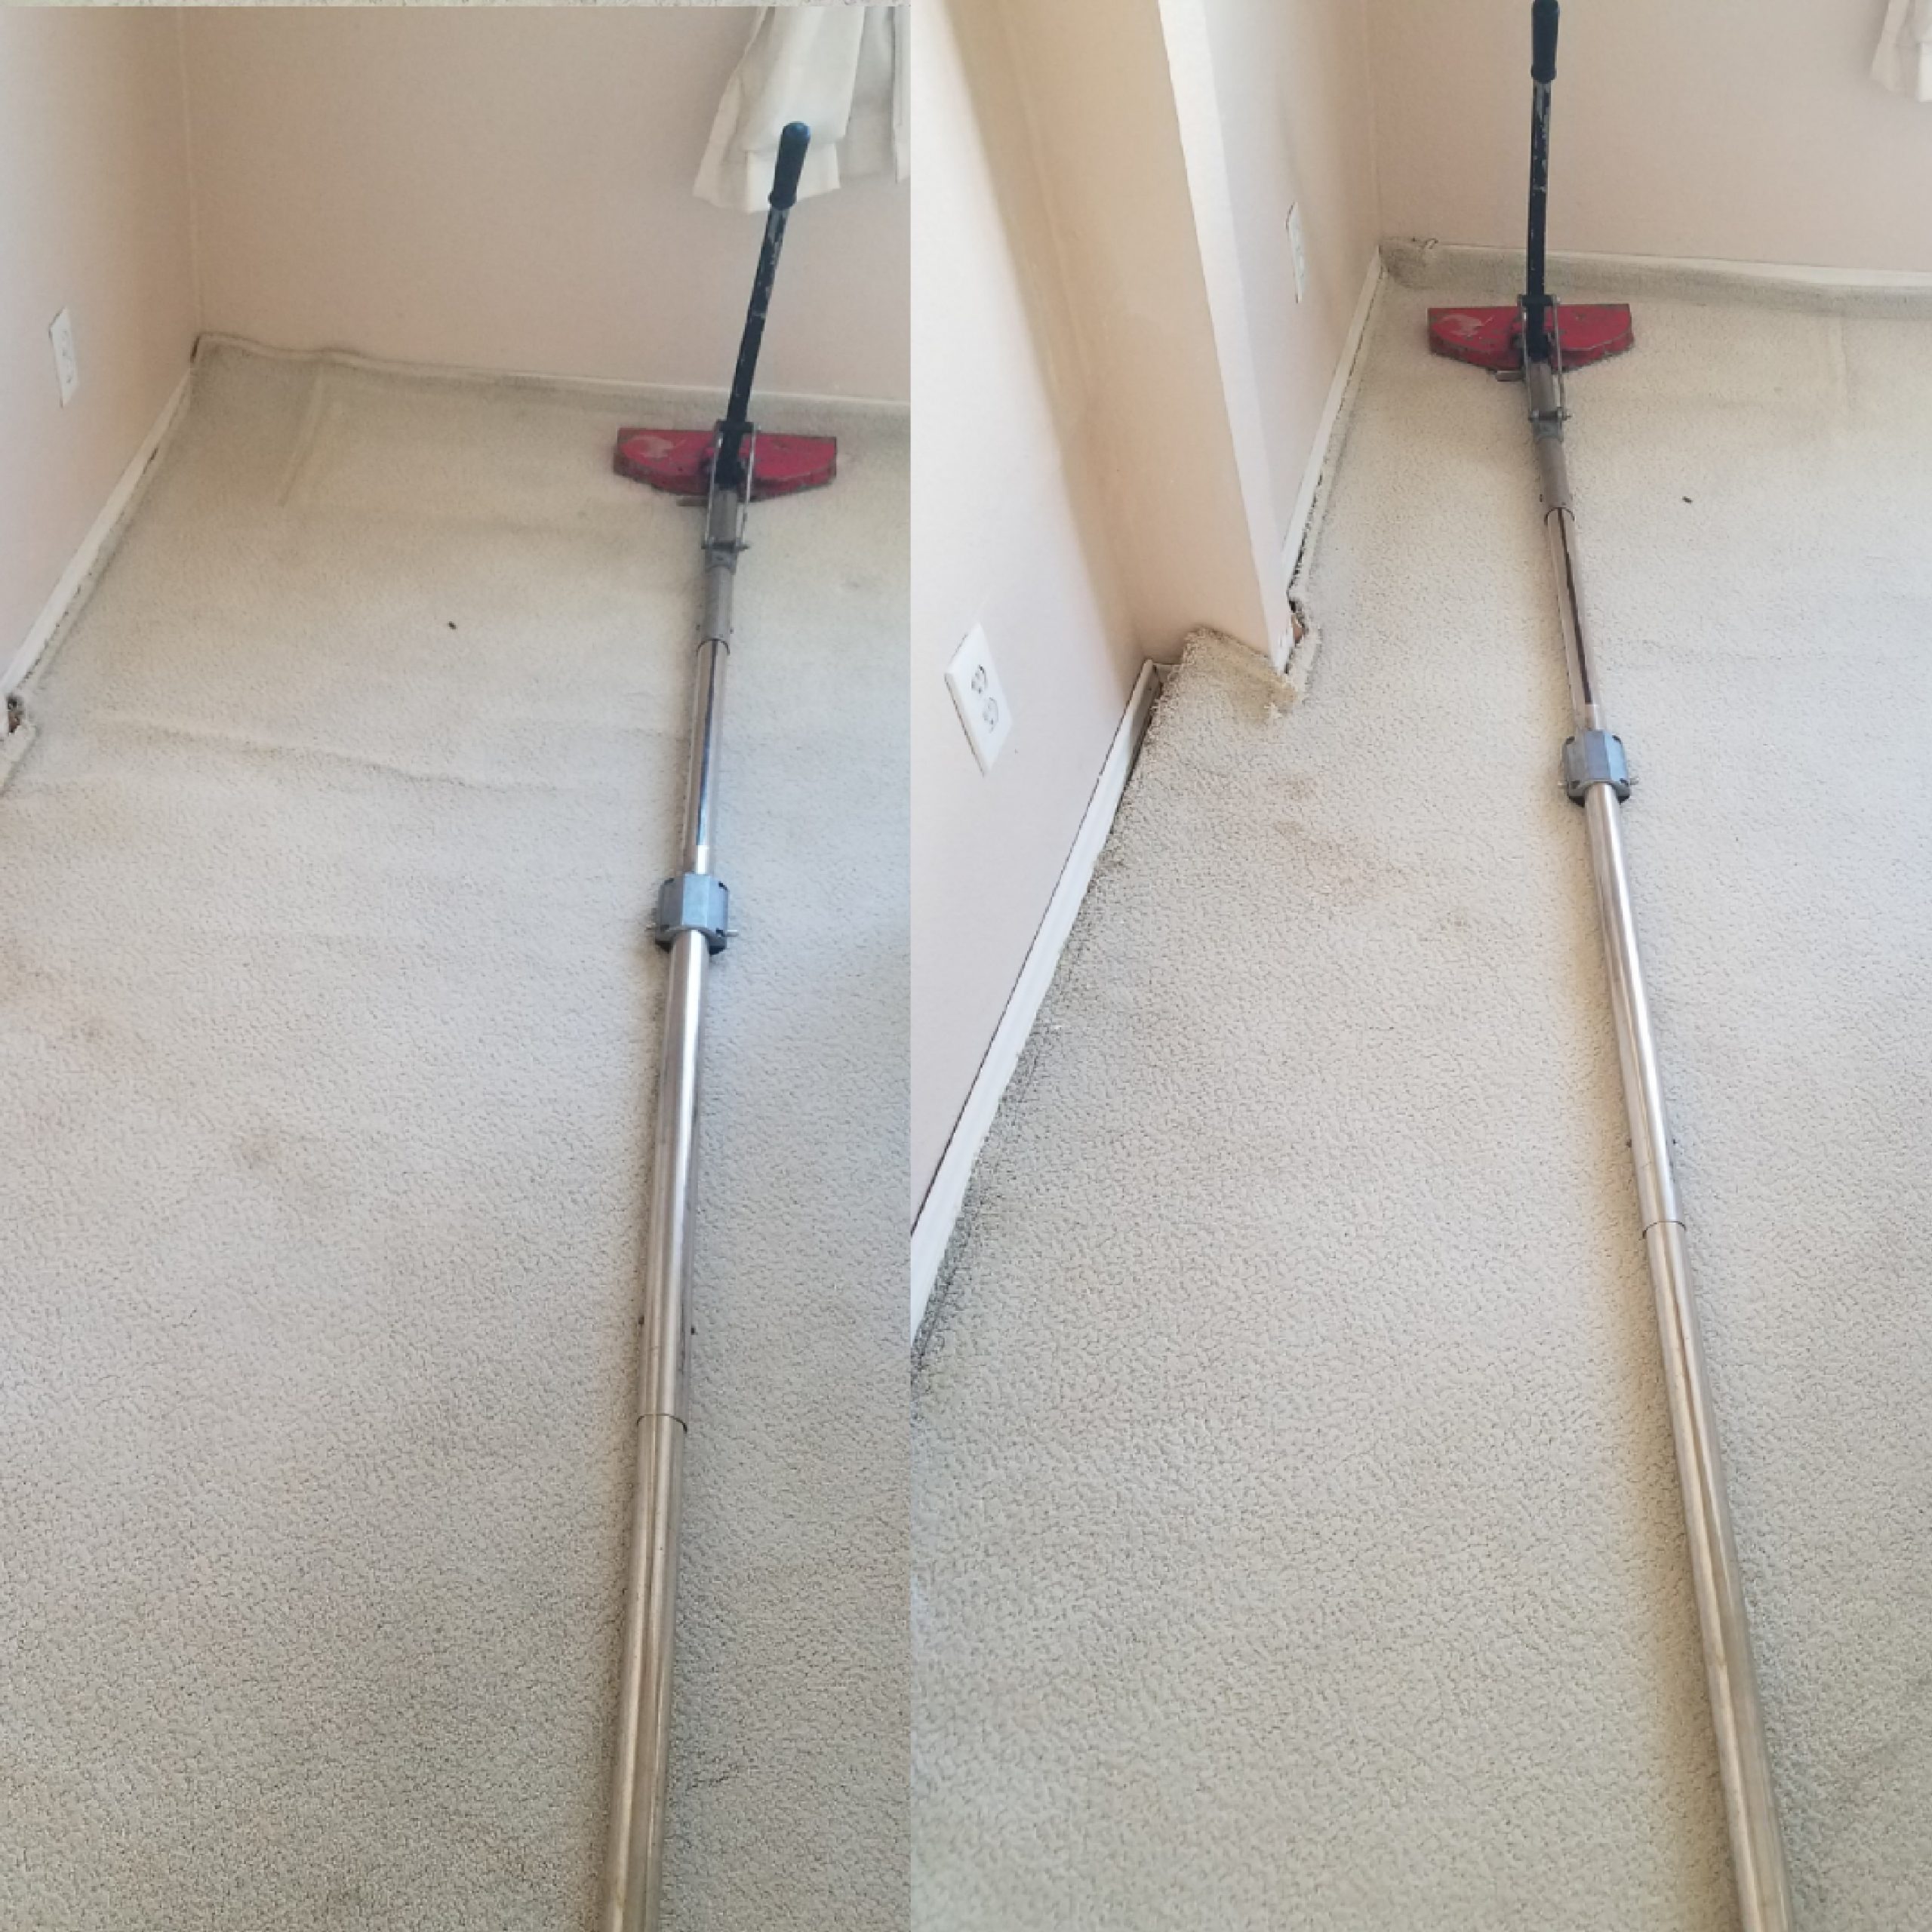 Carpet stretching with power stretcher